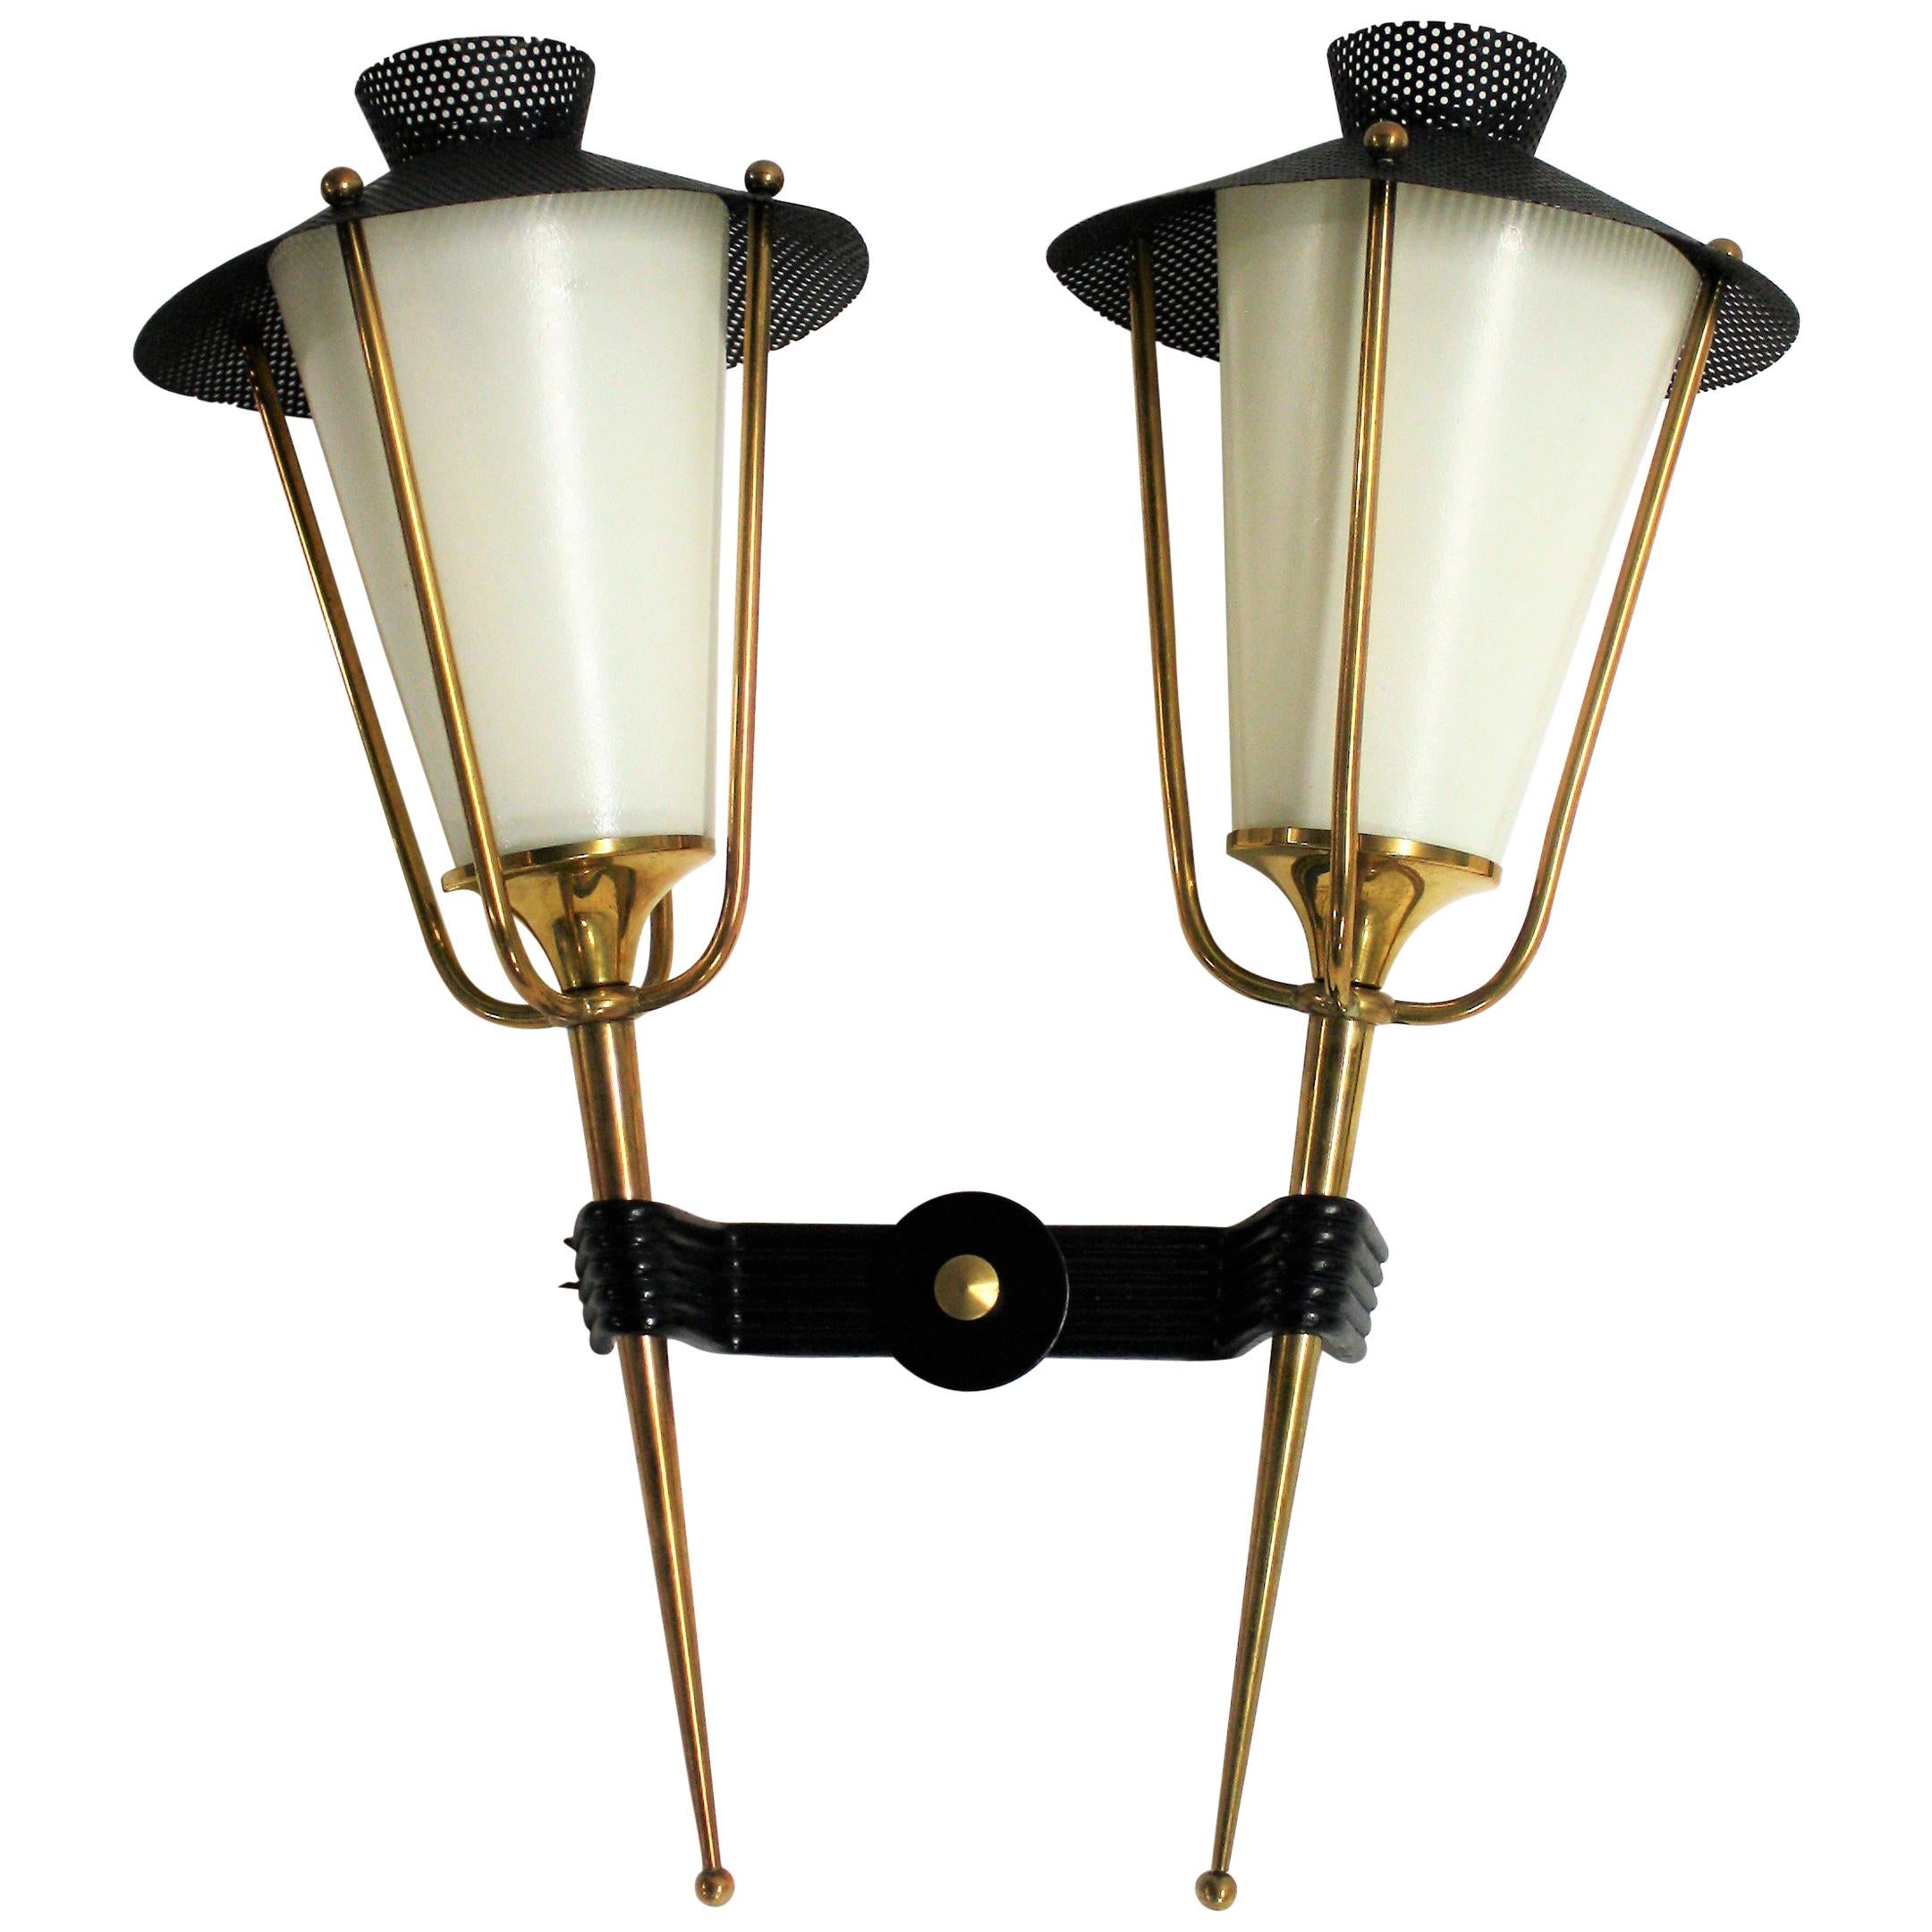 Vintage Wall Sconce by Maison Arlus, 1950s